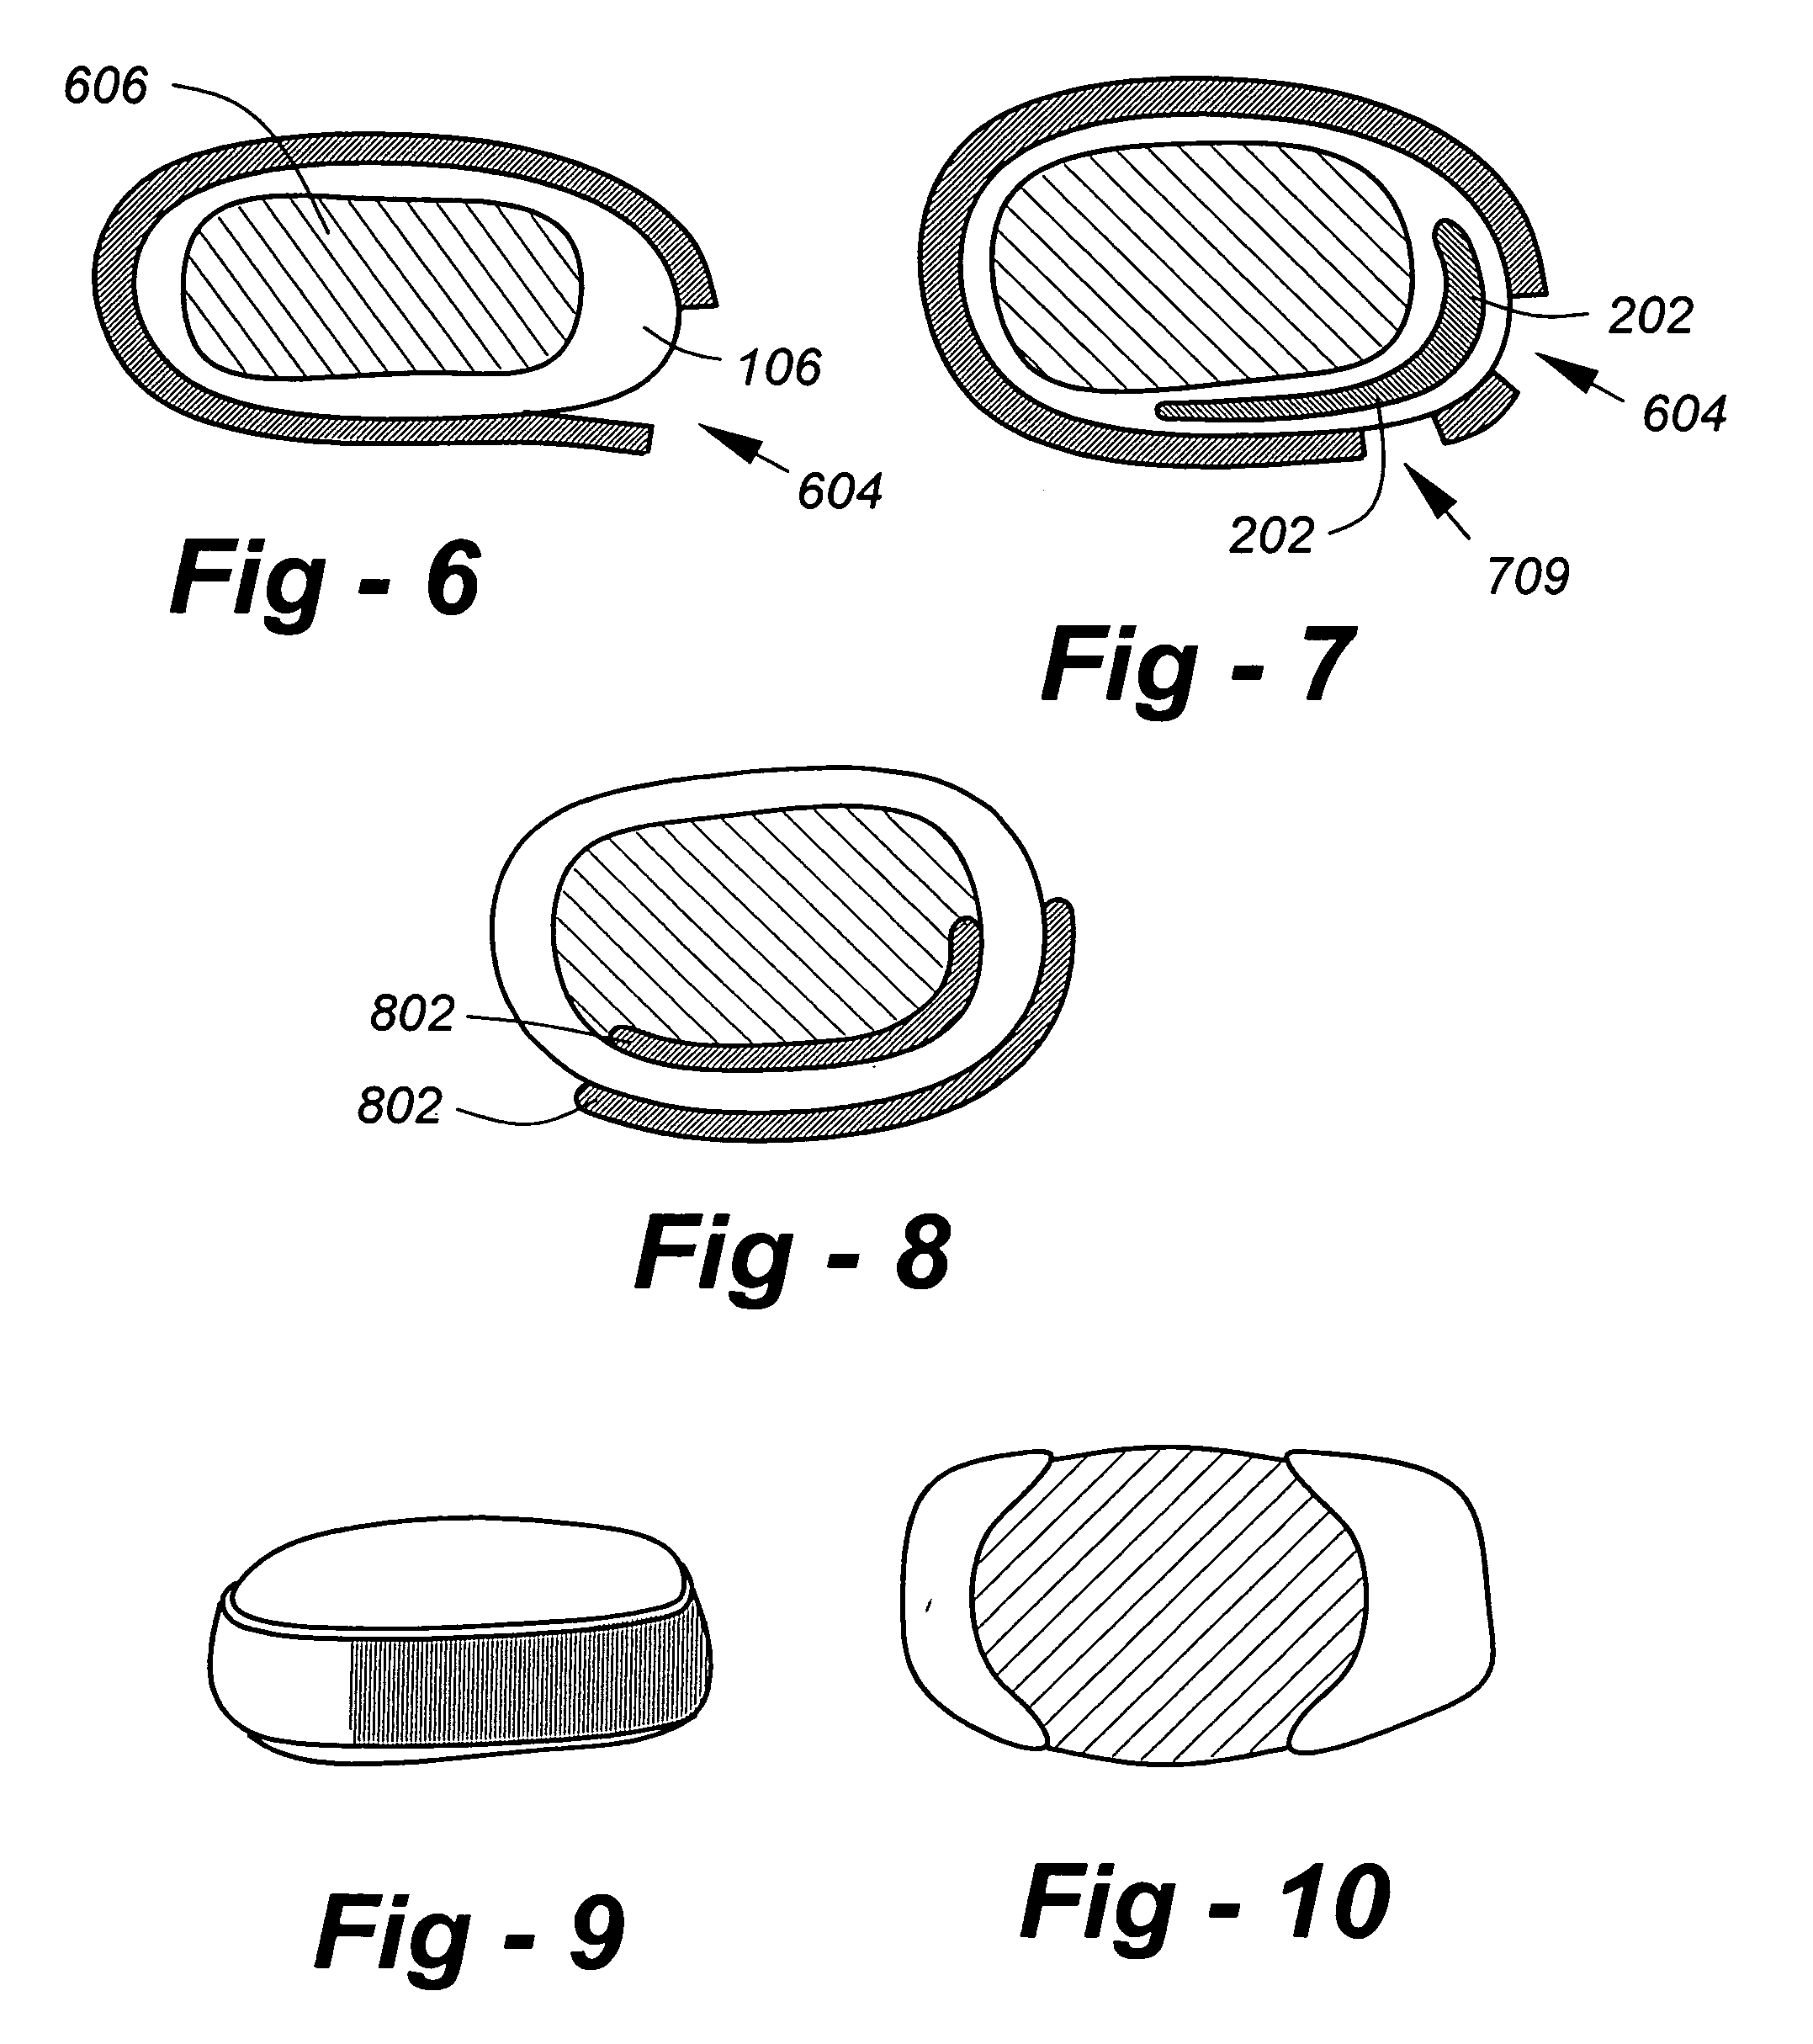 Artificial intervertebral disc replacements incorporating reinforced wall sections